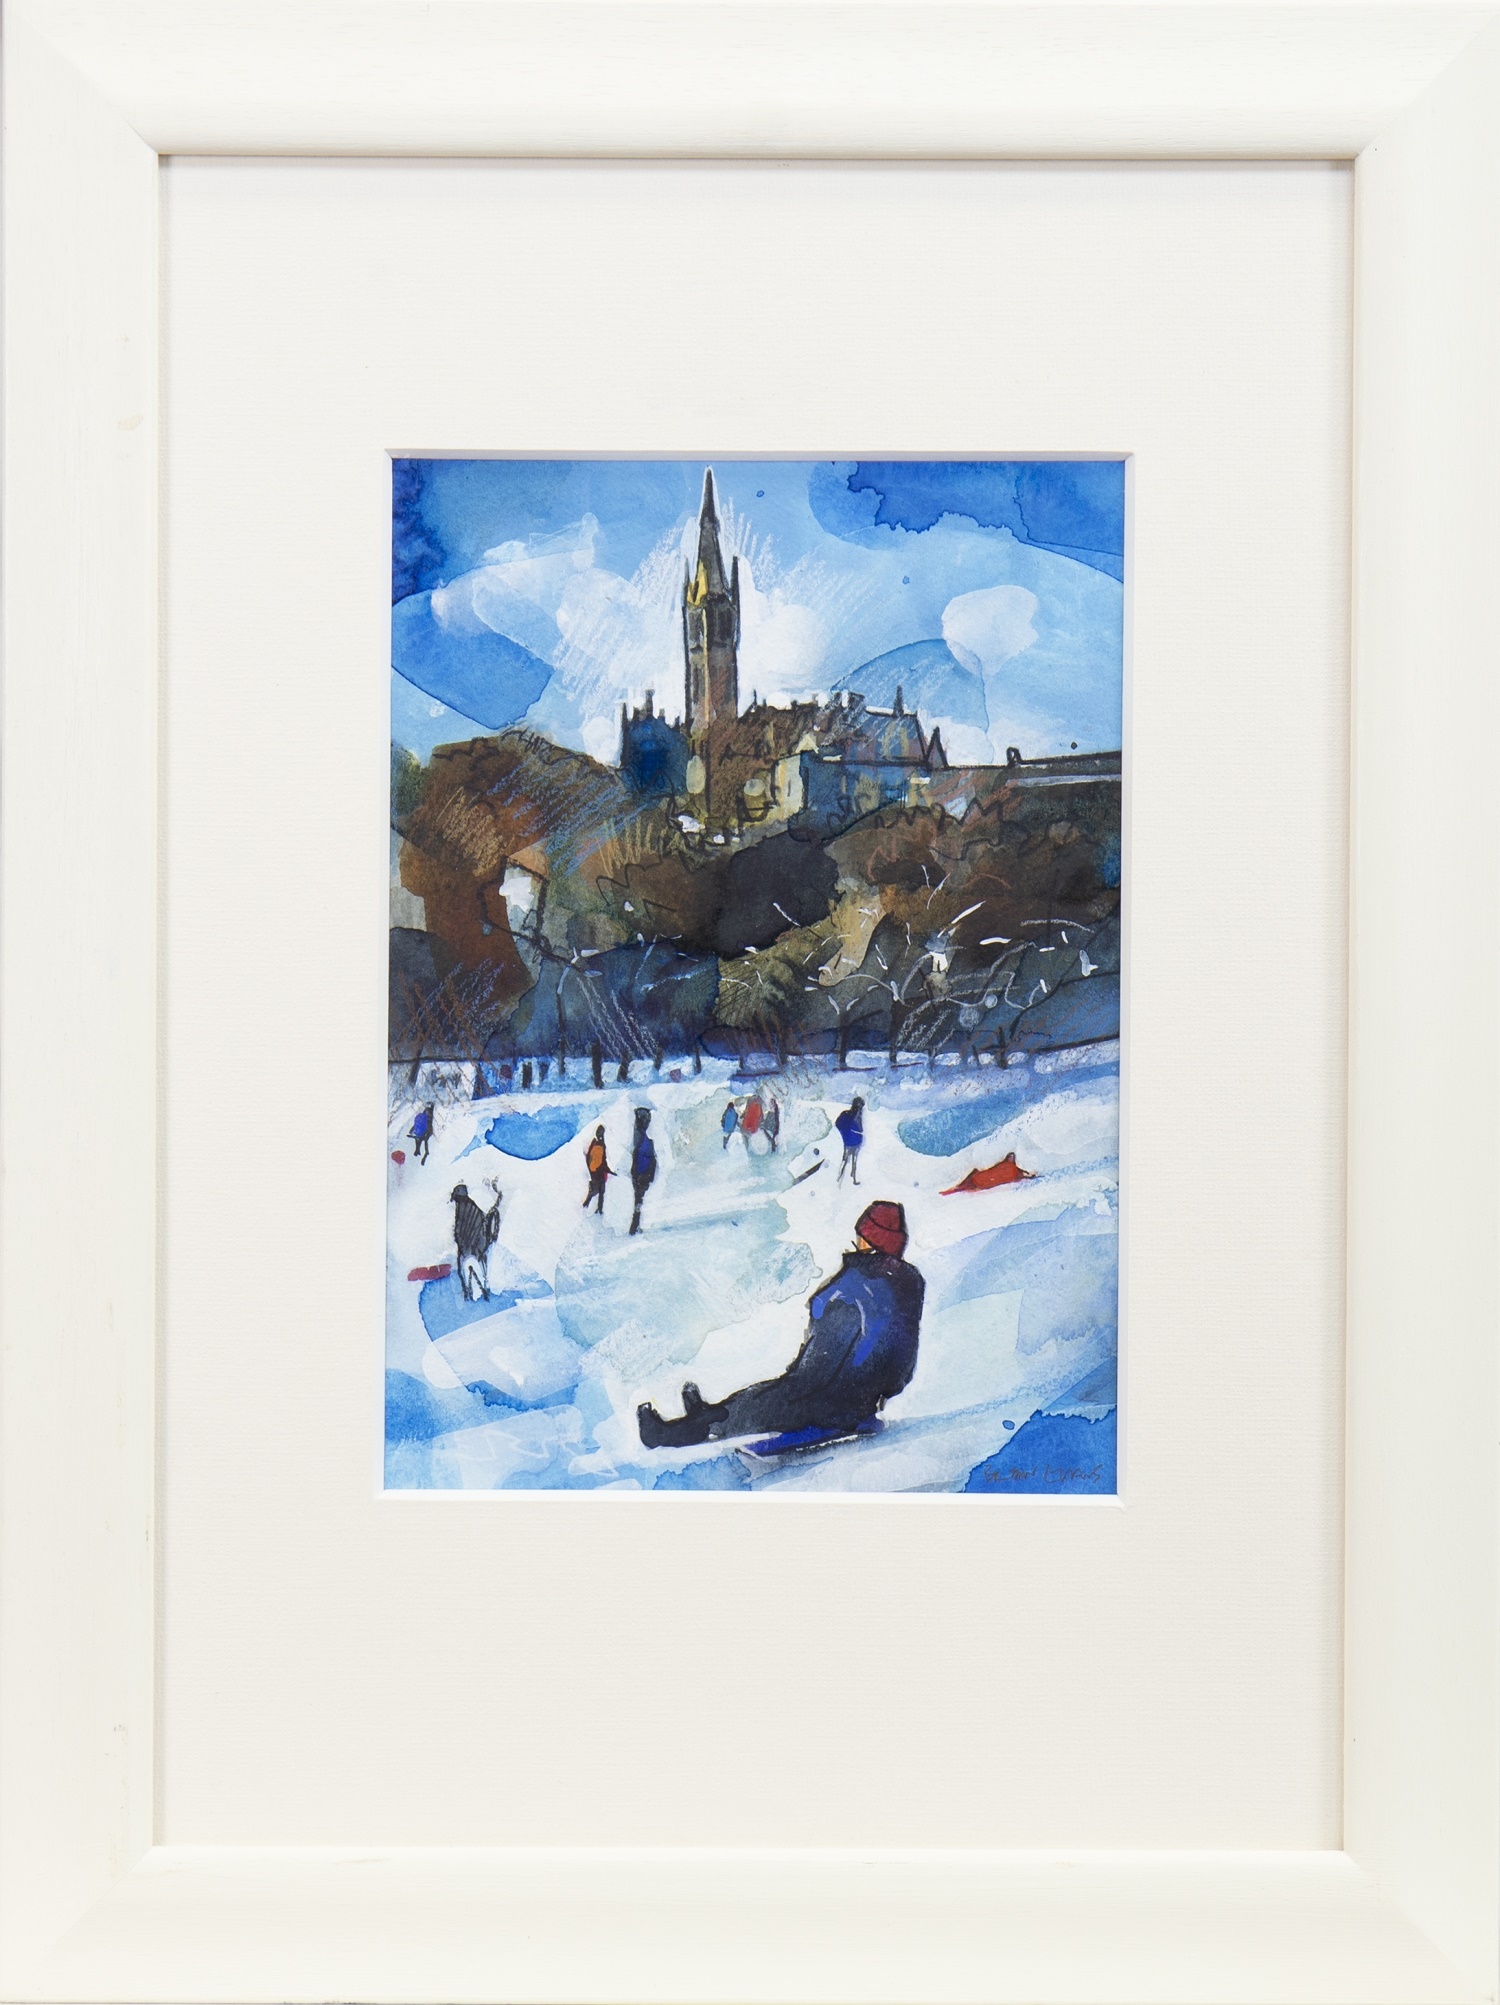 SLEDGING IN THE PARK, A WATERCOLOUR BY BRYAN EVANS